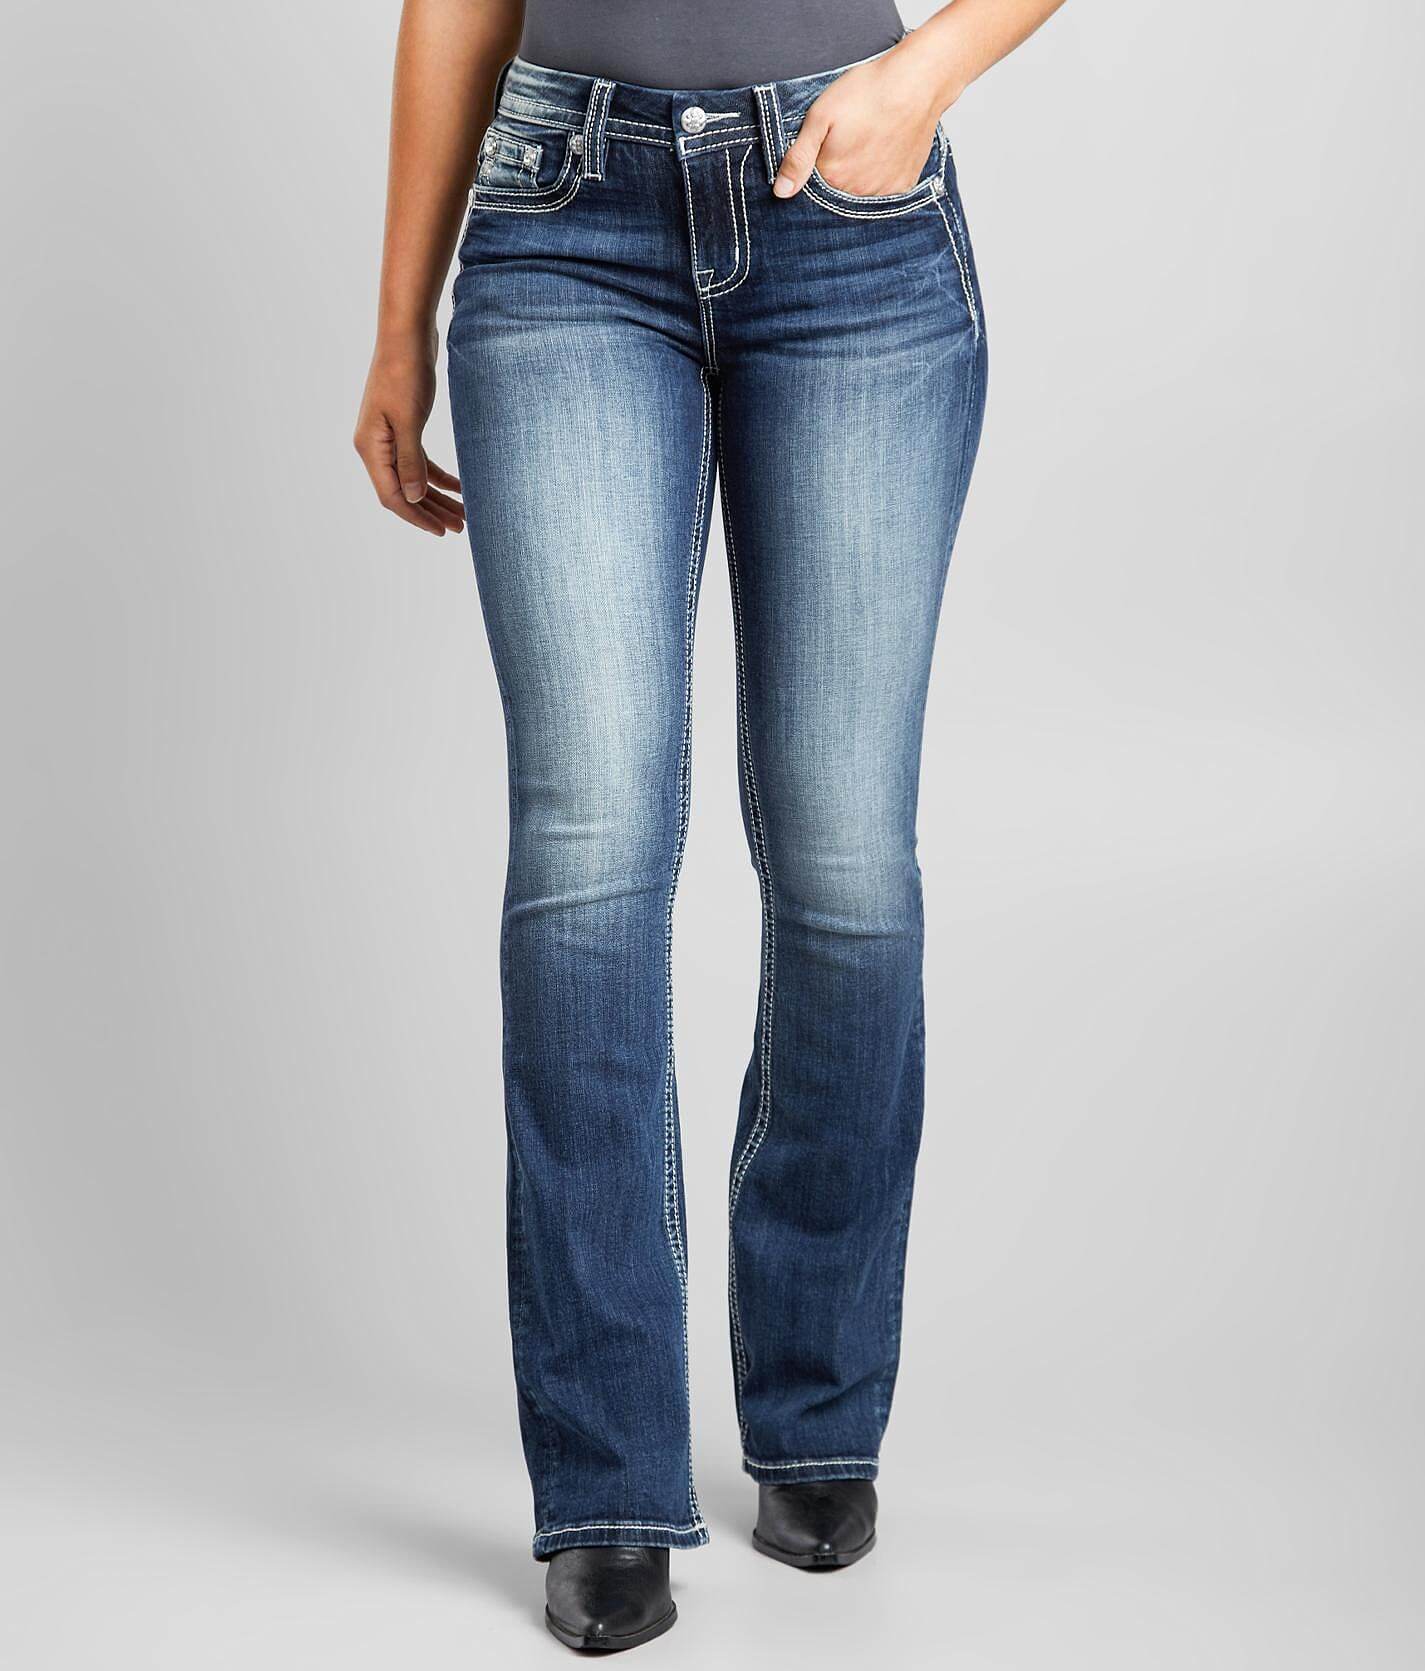 where to buy miss me jeans near me